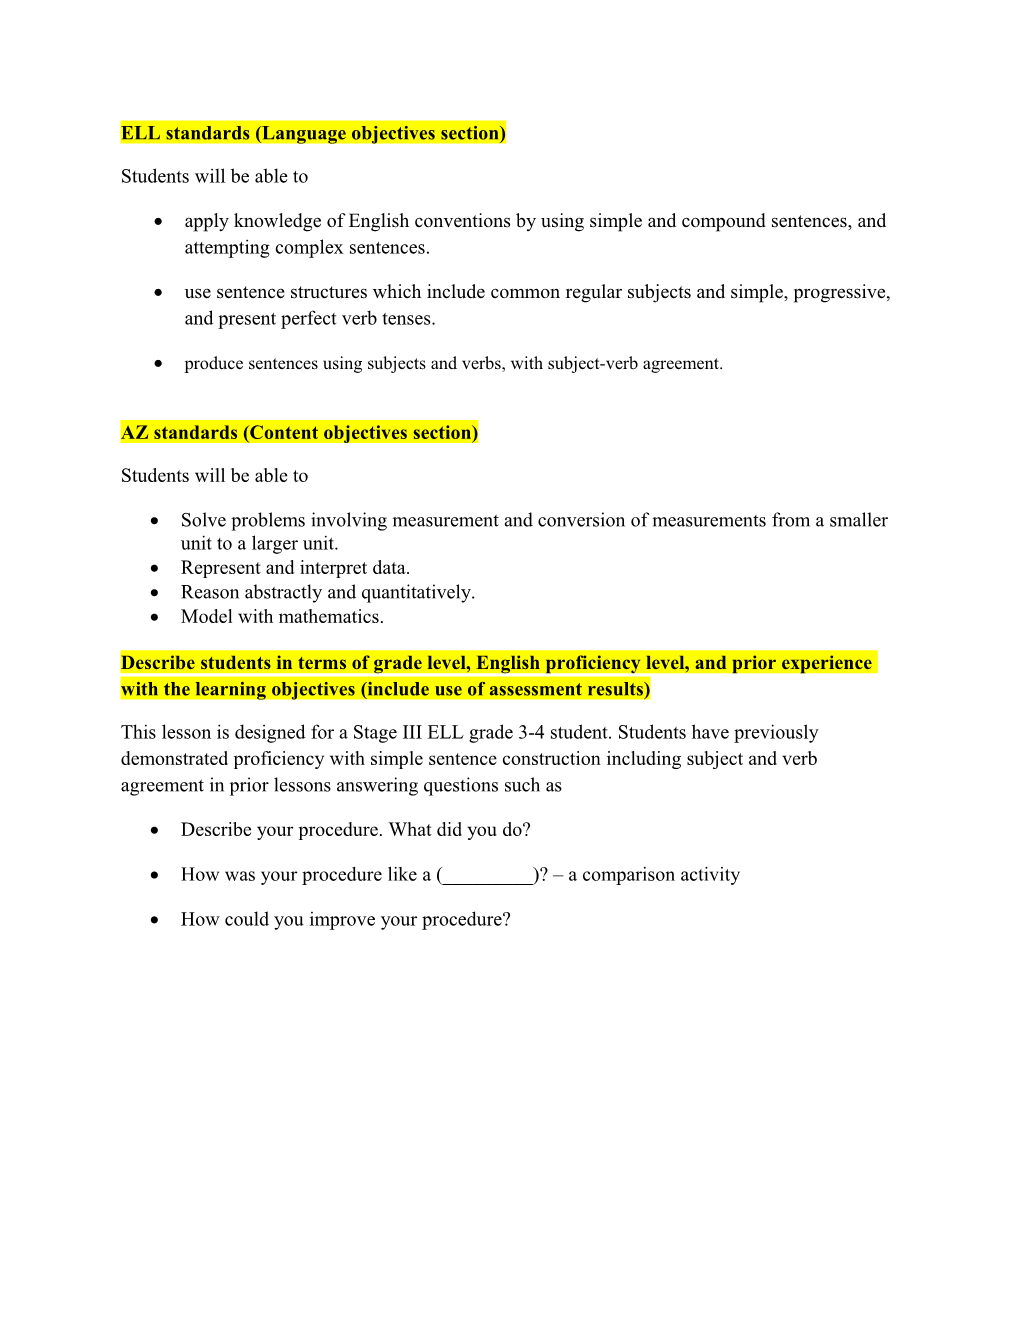 ELL Standards (Language Objectives Section)